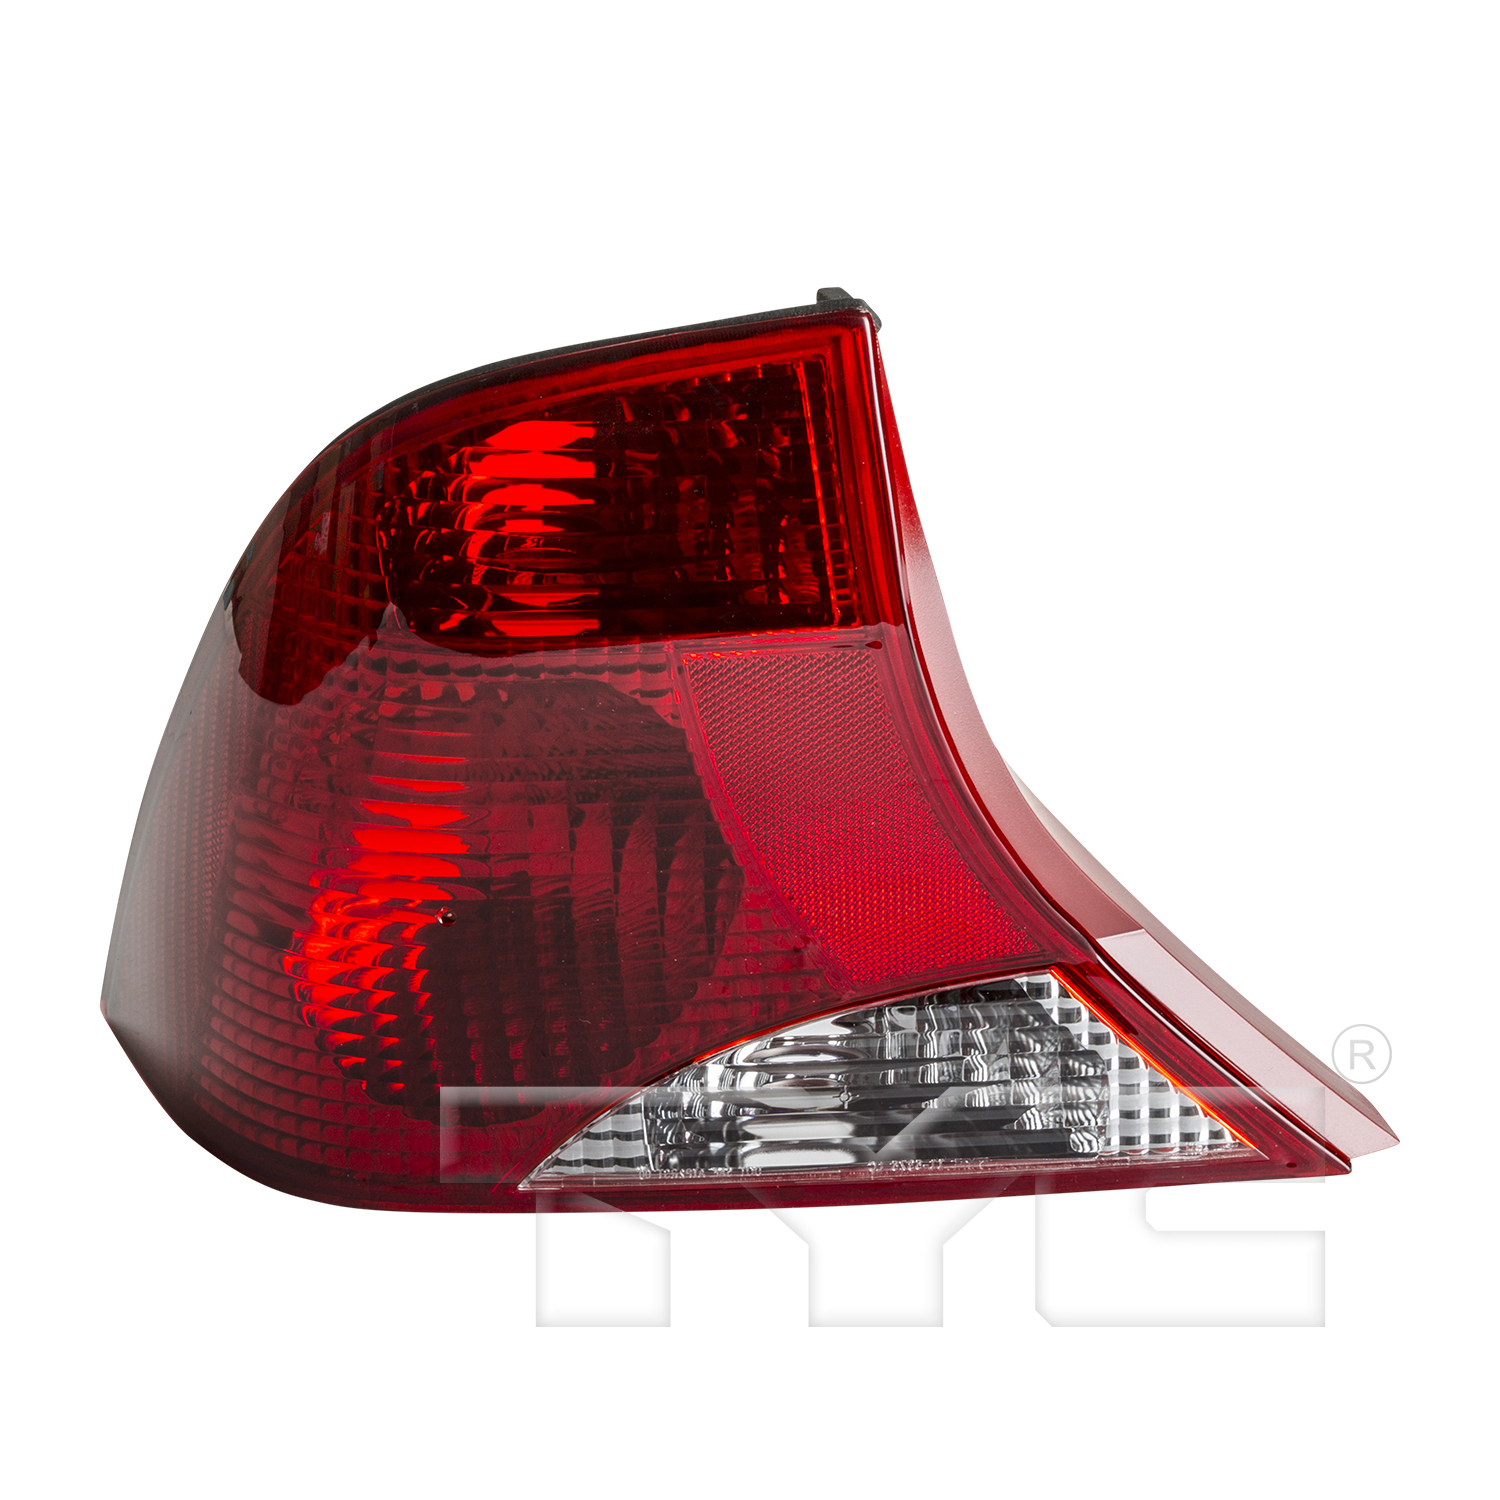 Aftermarket TAILLIGHTS for FORD - FOCUS, FOCUS,02-03,LT Taillamp assy